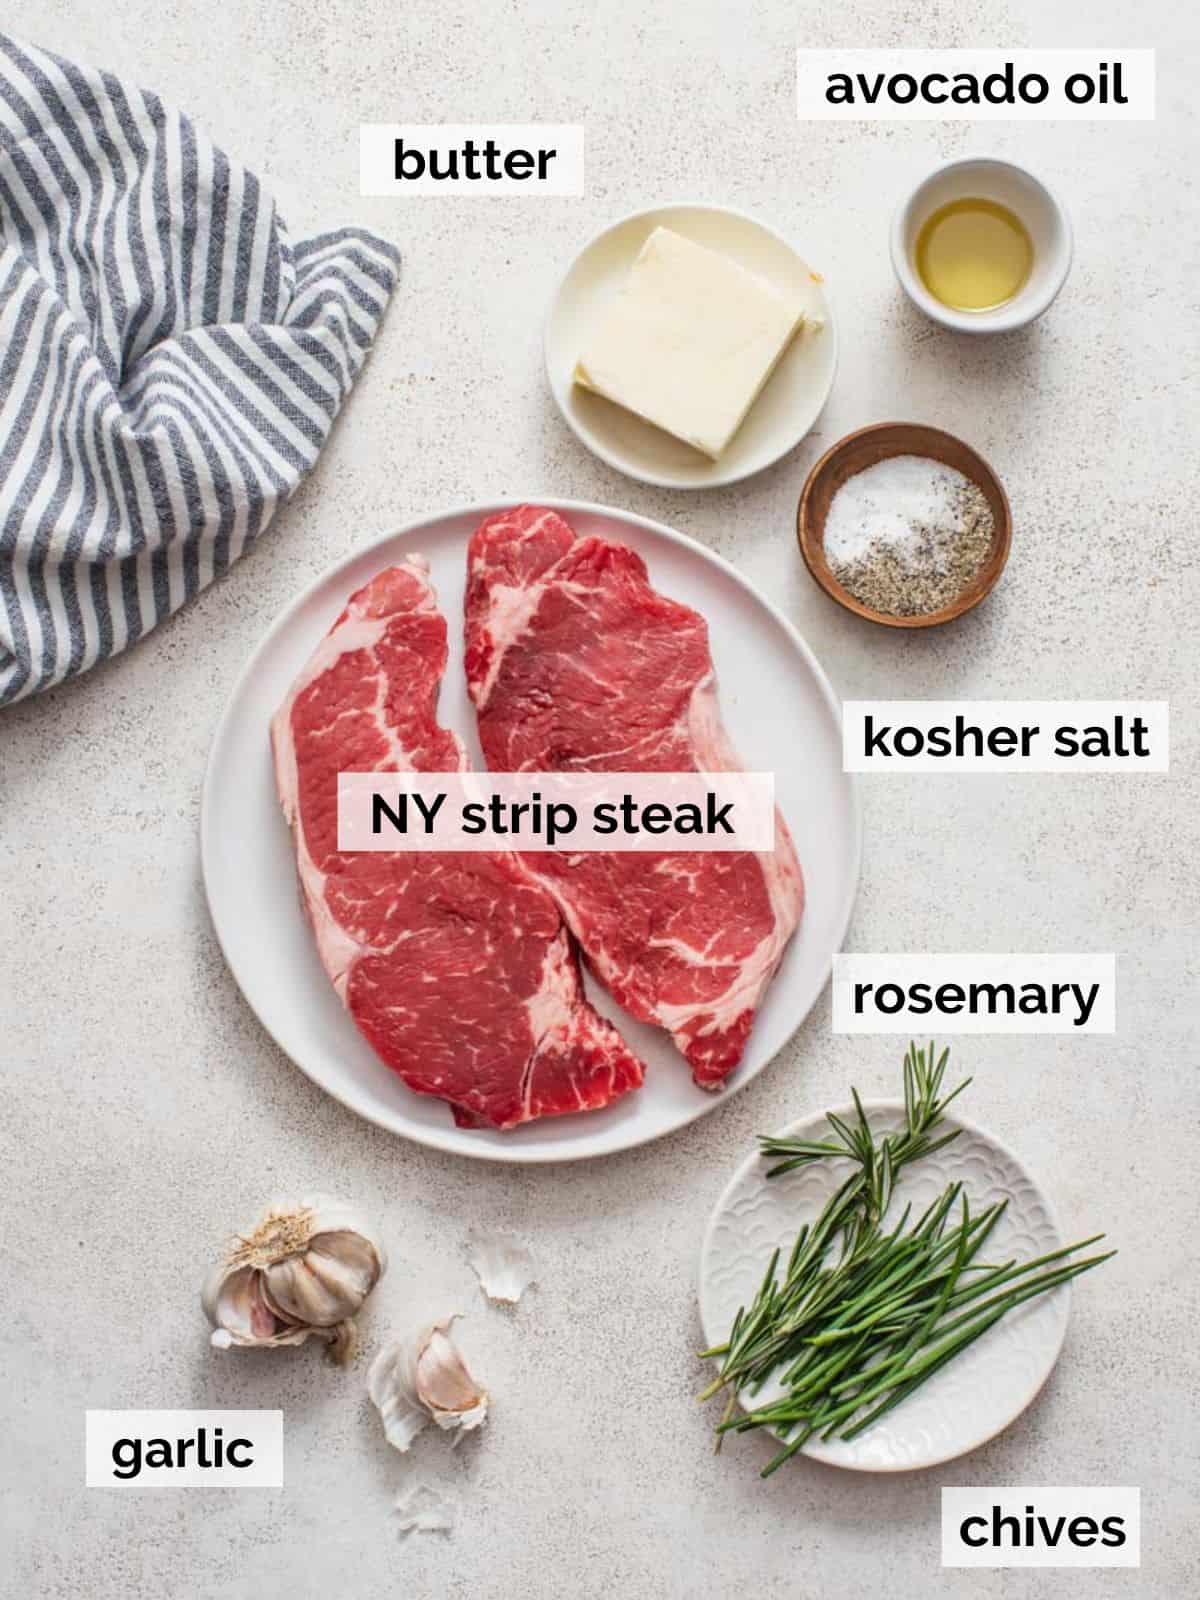 Ingredients for air fryer New York strip steak with chive compound butter.